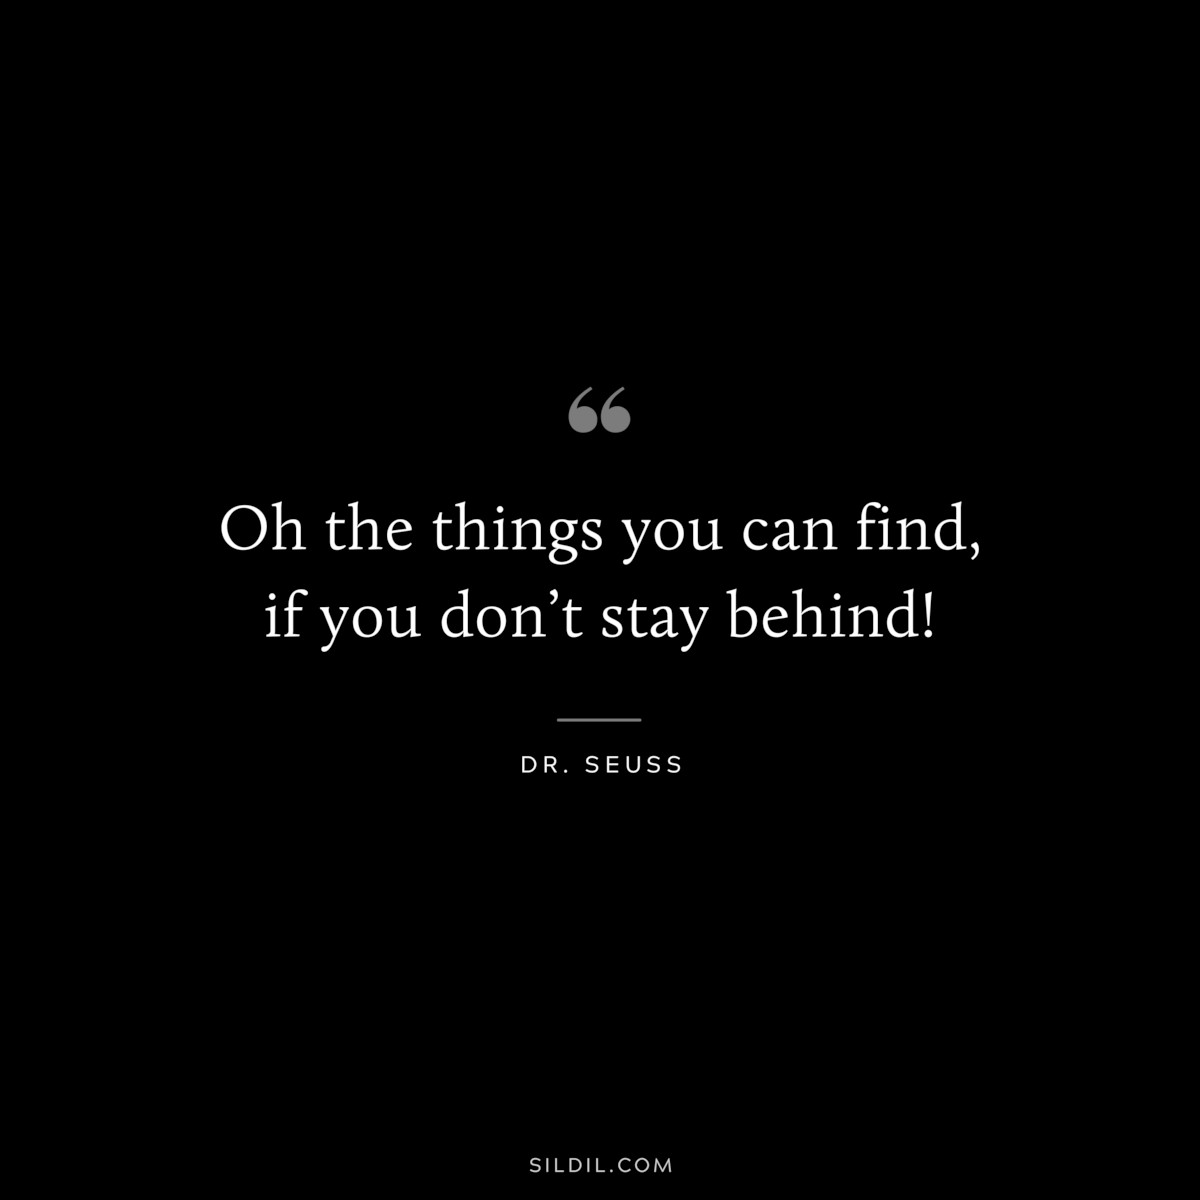 Oh the things you can find, if you don’t stay behind! ― Dr. Seuss